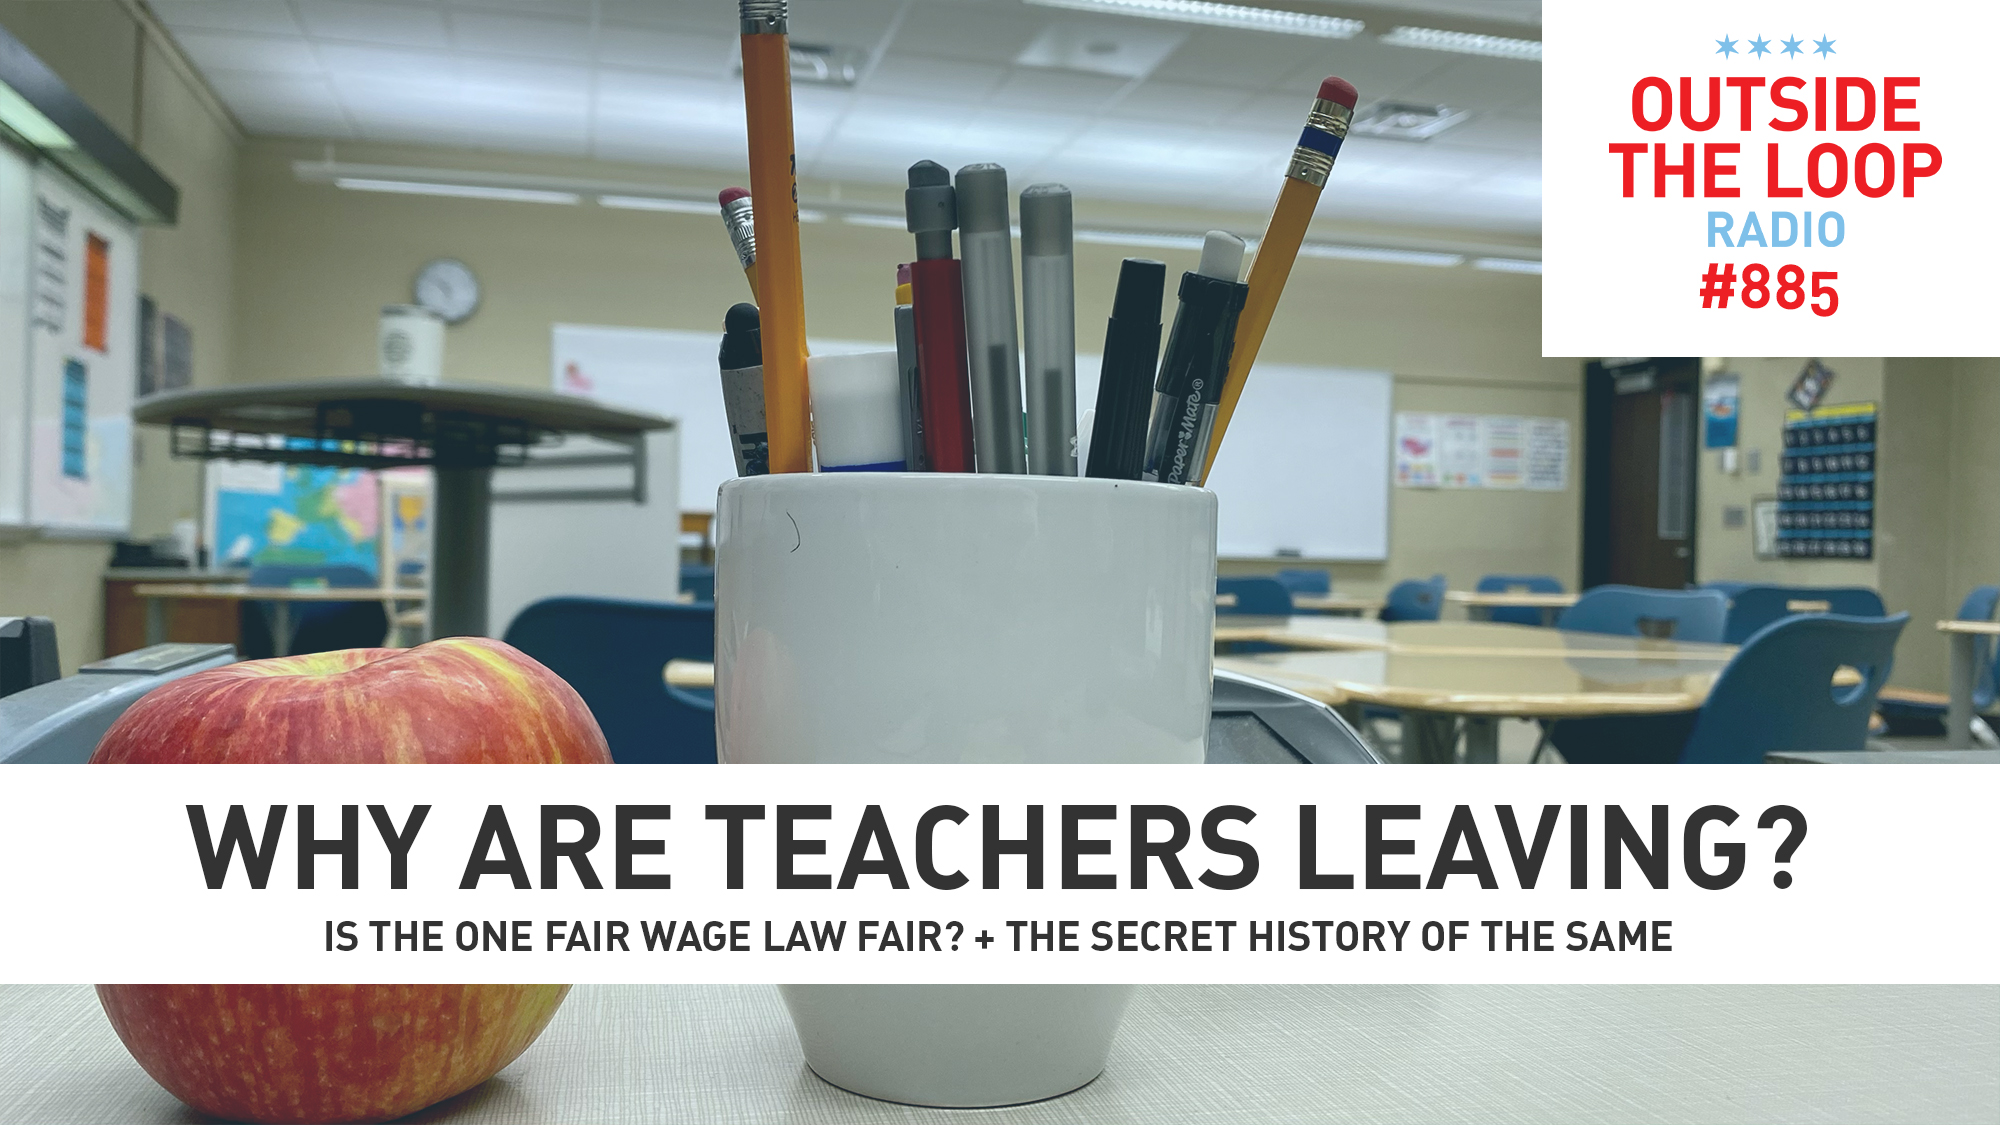 Why are teachers leaving the profession? (Photo credit: Mike Stephen/WGN Radio)